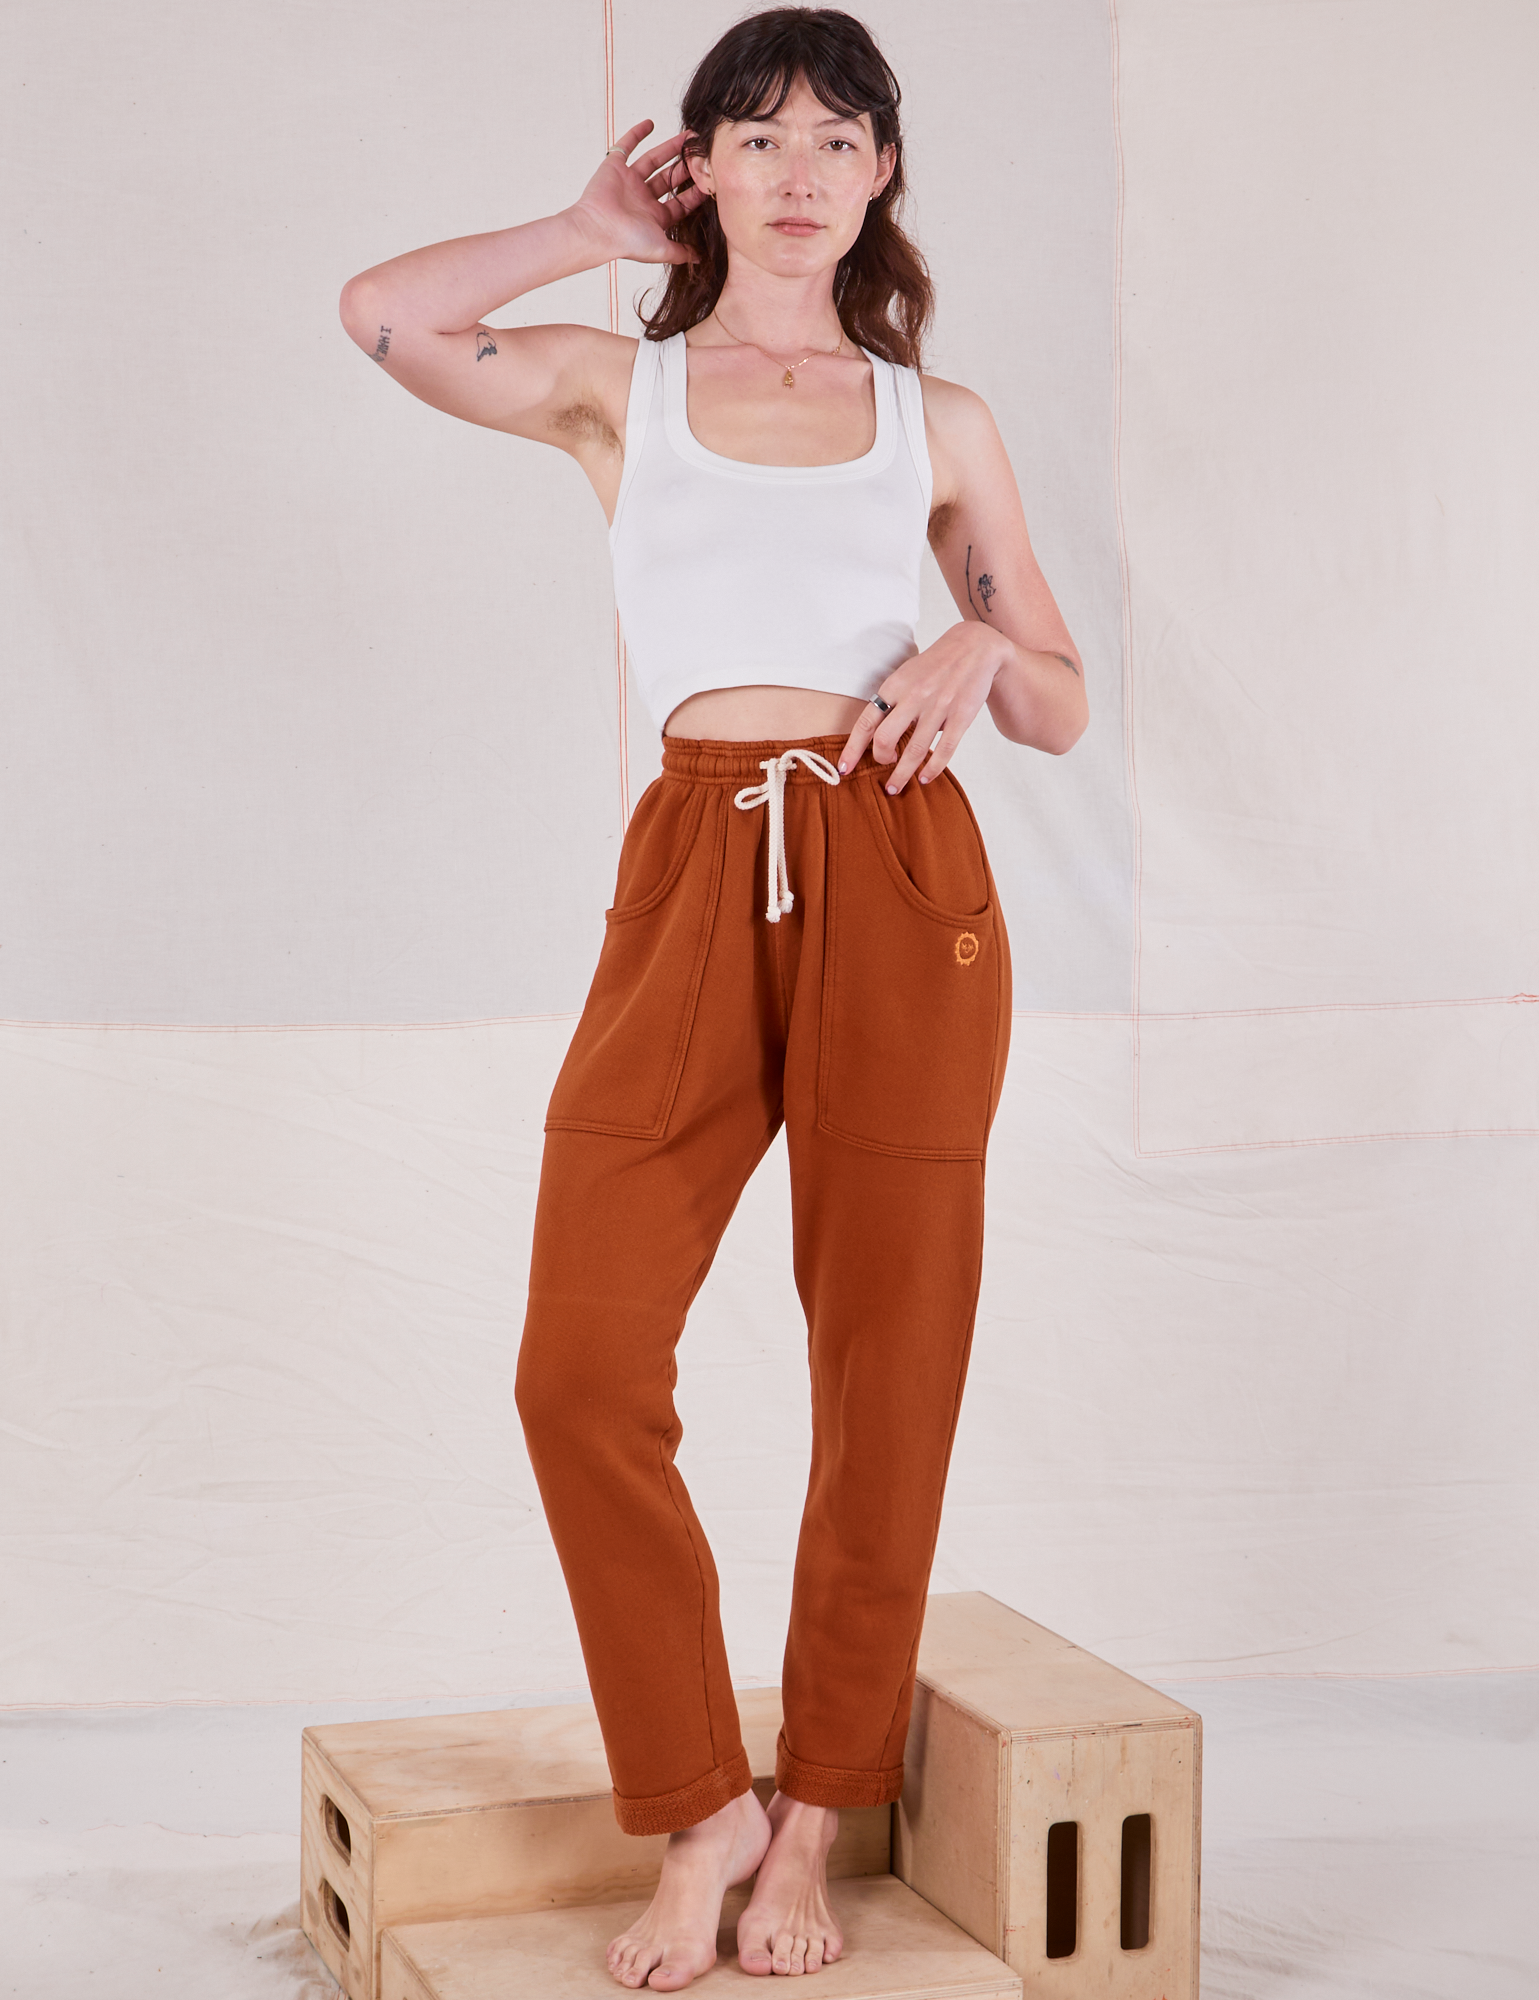 Alex is 5&#39;8&quot; and wearing P Rolled Cuff Sweat Pants in Burnt Terracotta paired with vintage off-white Cropped Tank